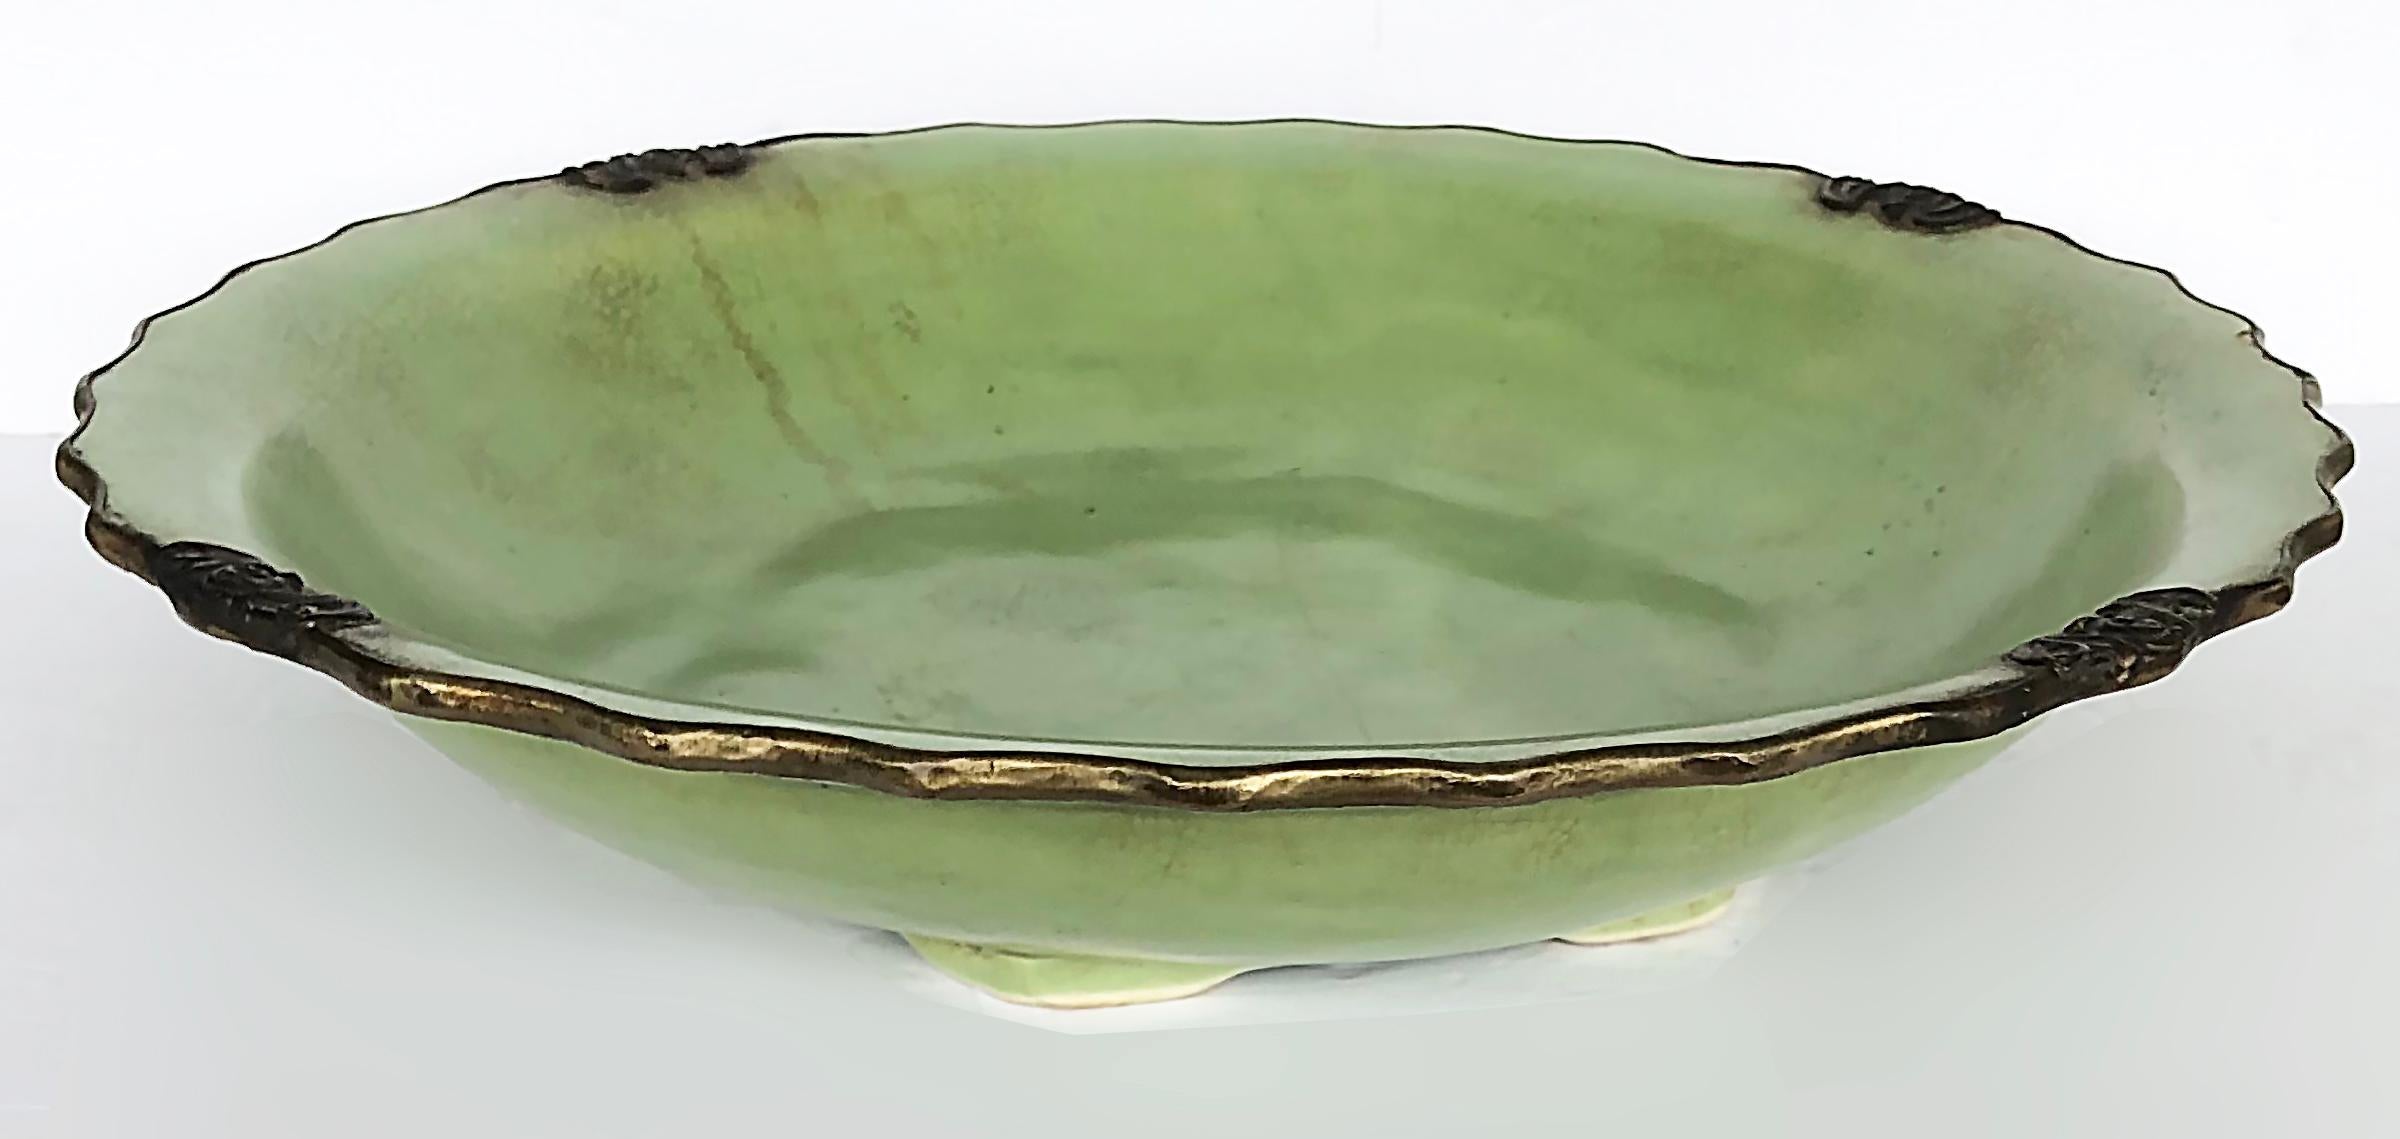 Large John Richard Porcelain ceramic centerpiece bowl with crackle glaze

Offered for sale is a large modern celadon crackle glaze porcelain centerpiece from the John Richard Collection. The centerpiece bowl has intentional distressing with brown